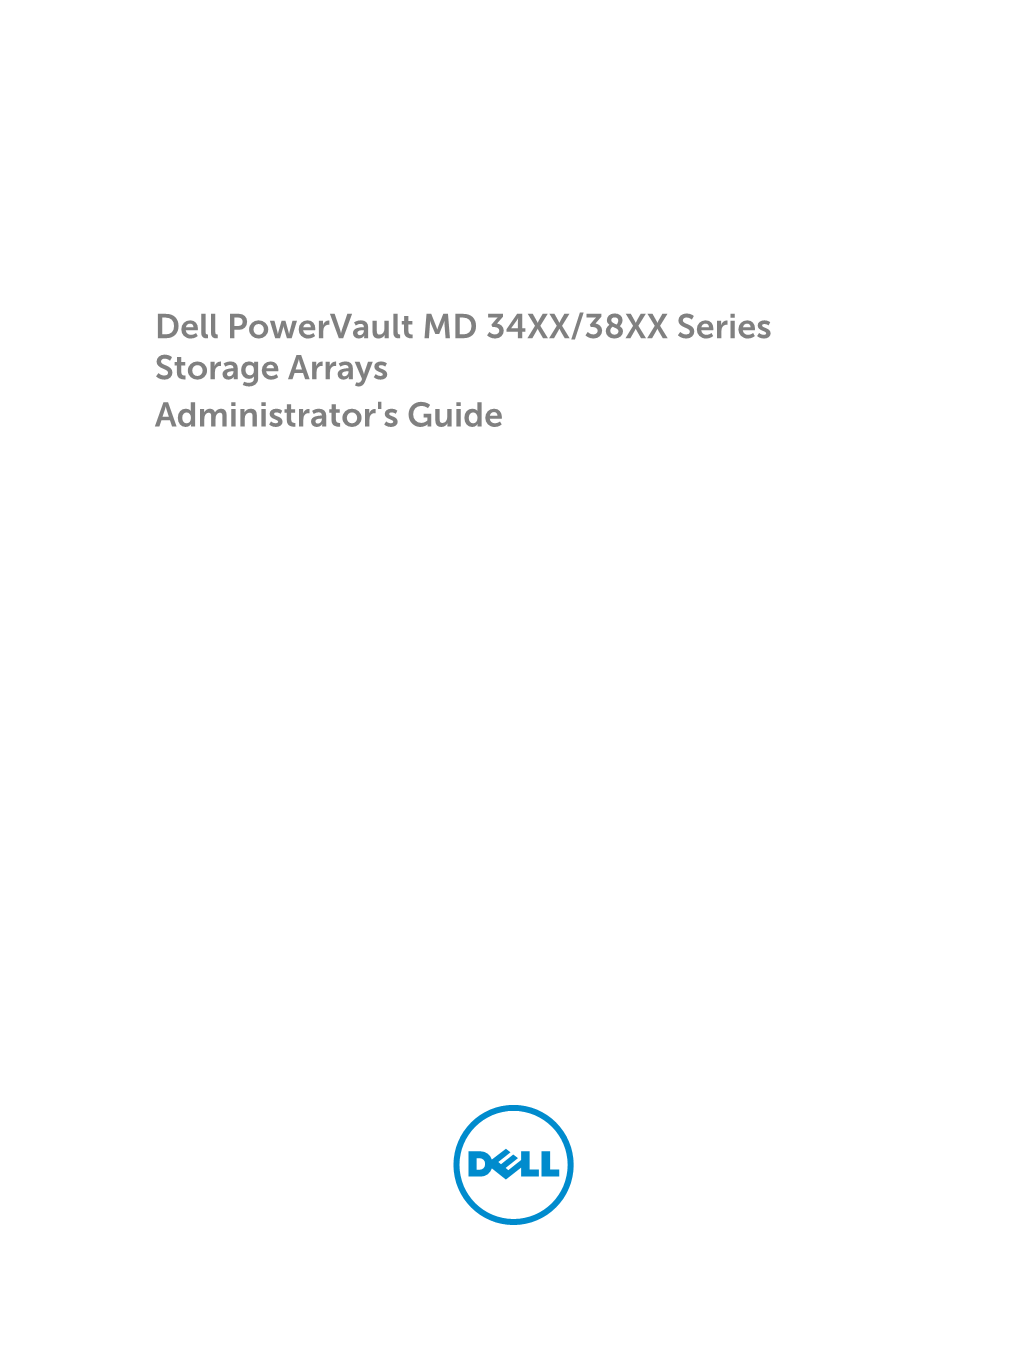 Dell Powervault MD 34XX/38XX Series Storage Arrays Administrator's Guide Notes, Cautions, and Warnings